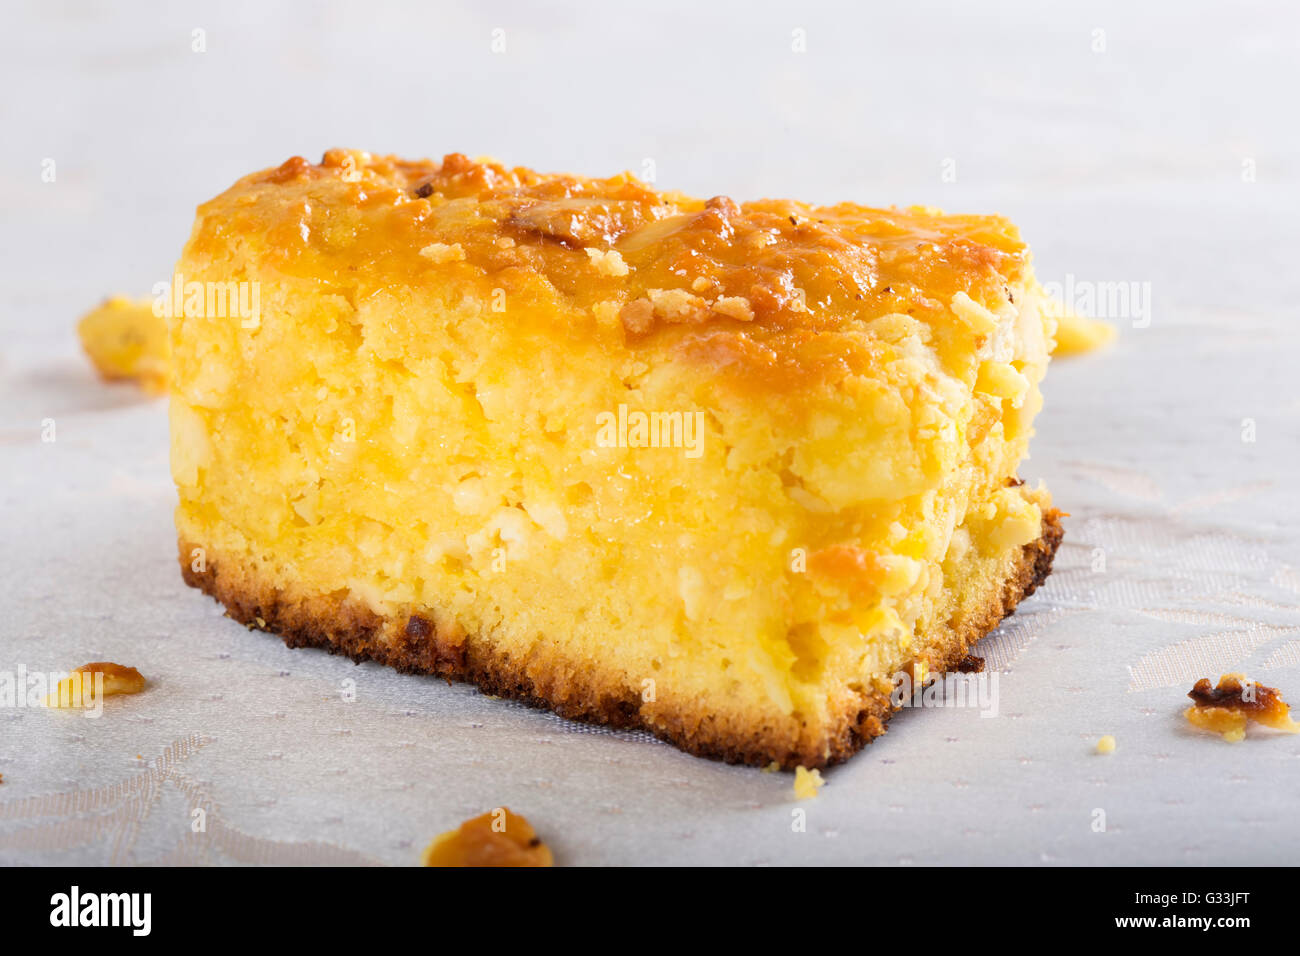 Slices of pie with cottage cheese Stock Photo